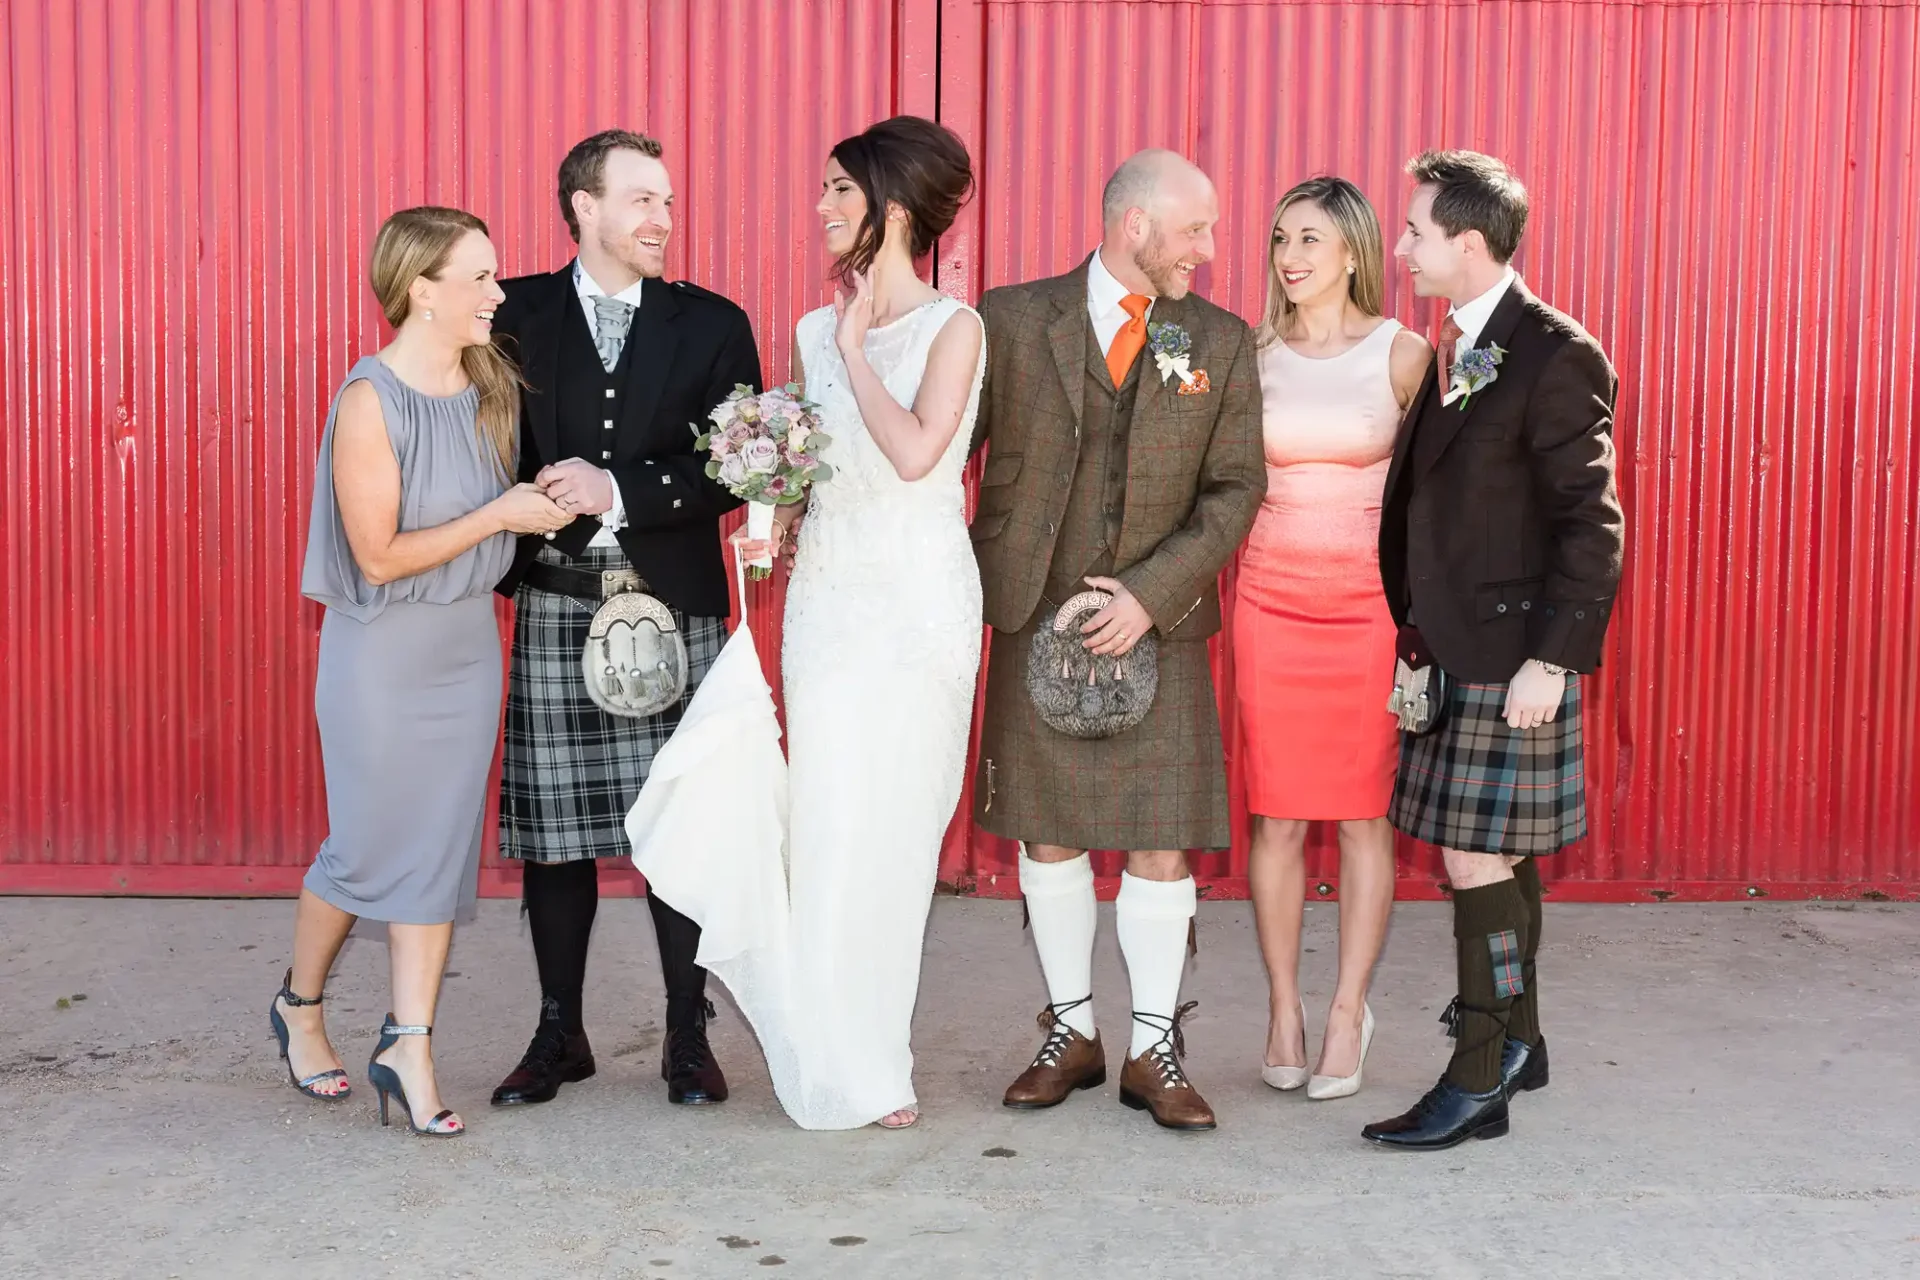 Group of six people in formal attire, featuring kilts and a wedding dress, smiling and interacting in front of a red backdrop.